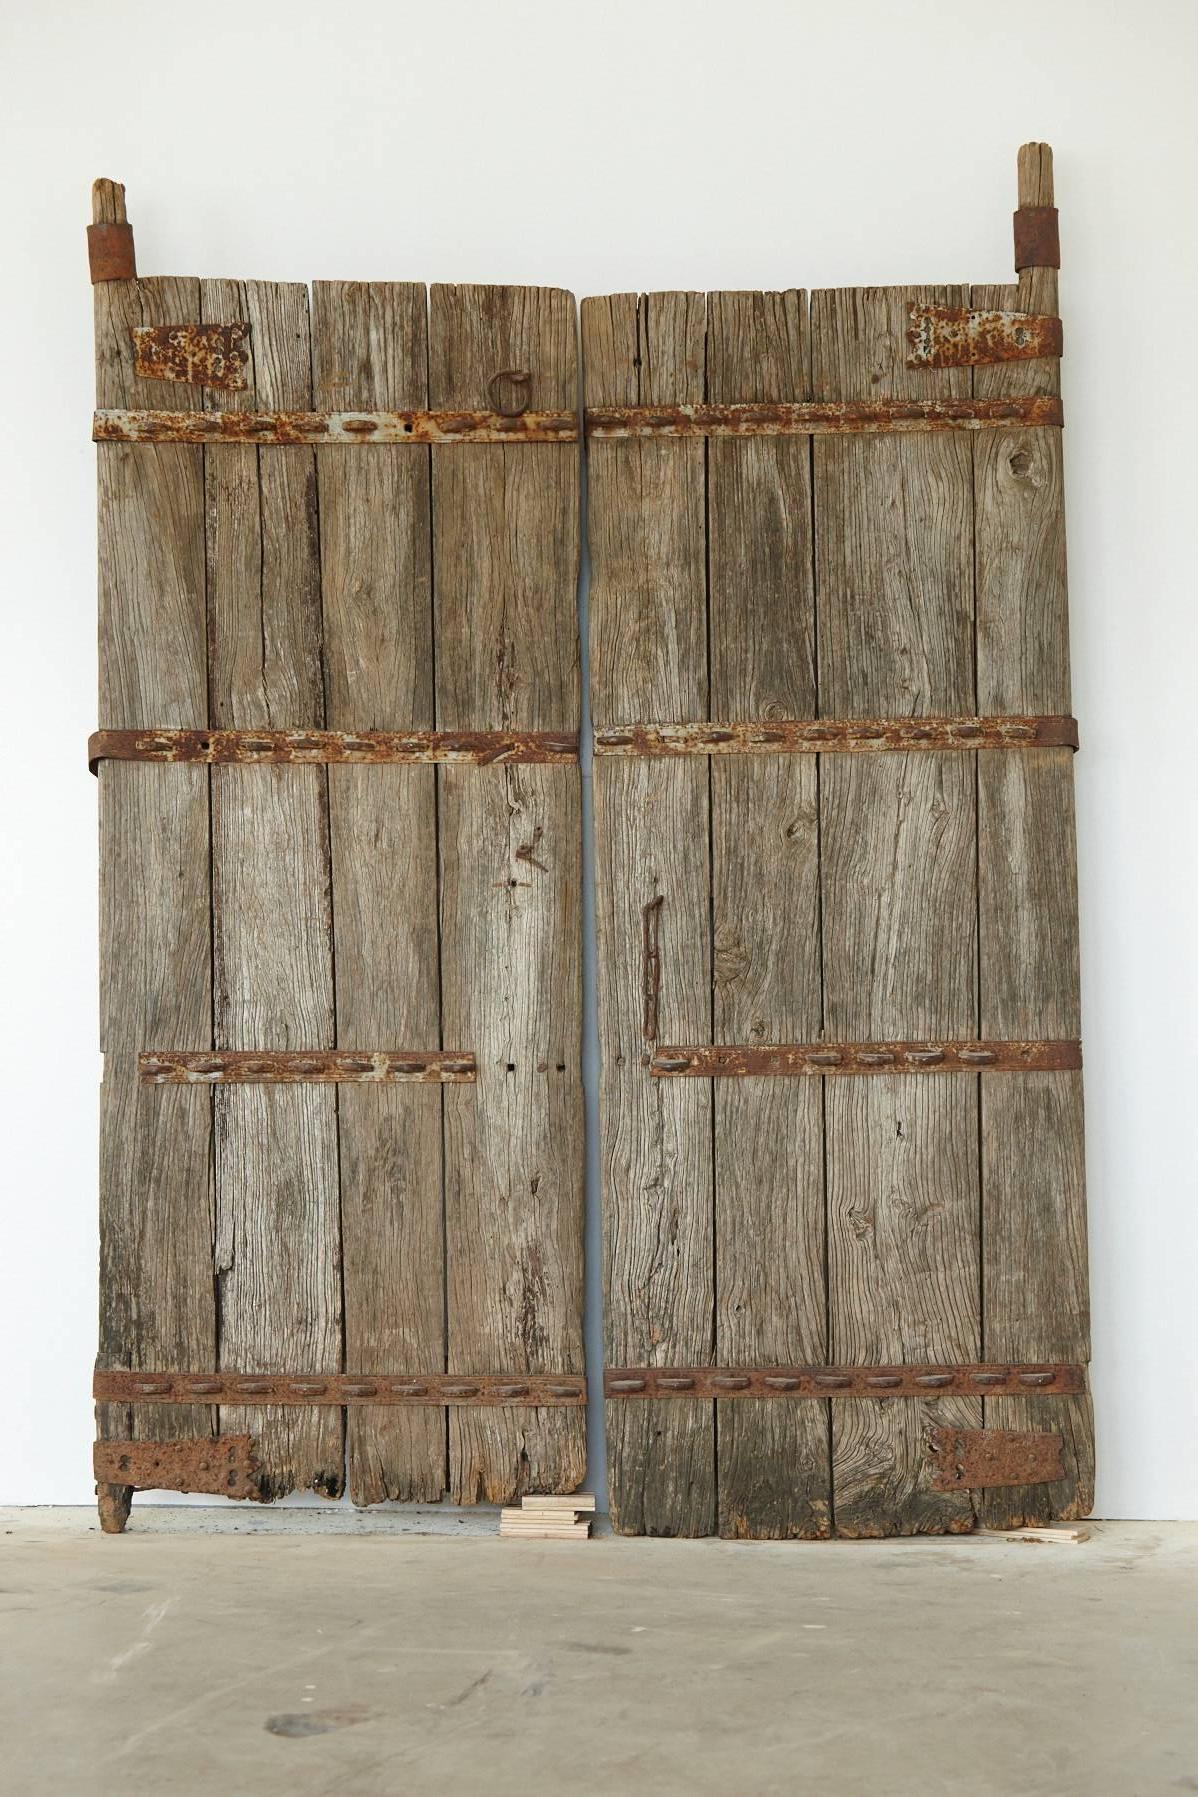 Pair of unrestored Chinese gate doors in heavy, reinforced solid oak with hand-forged metal applications. The depth of the doors is 7